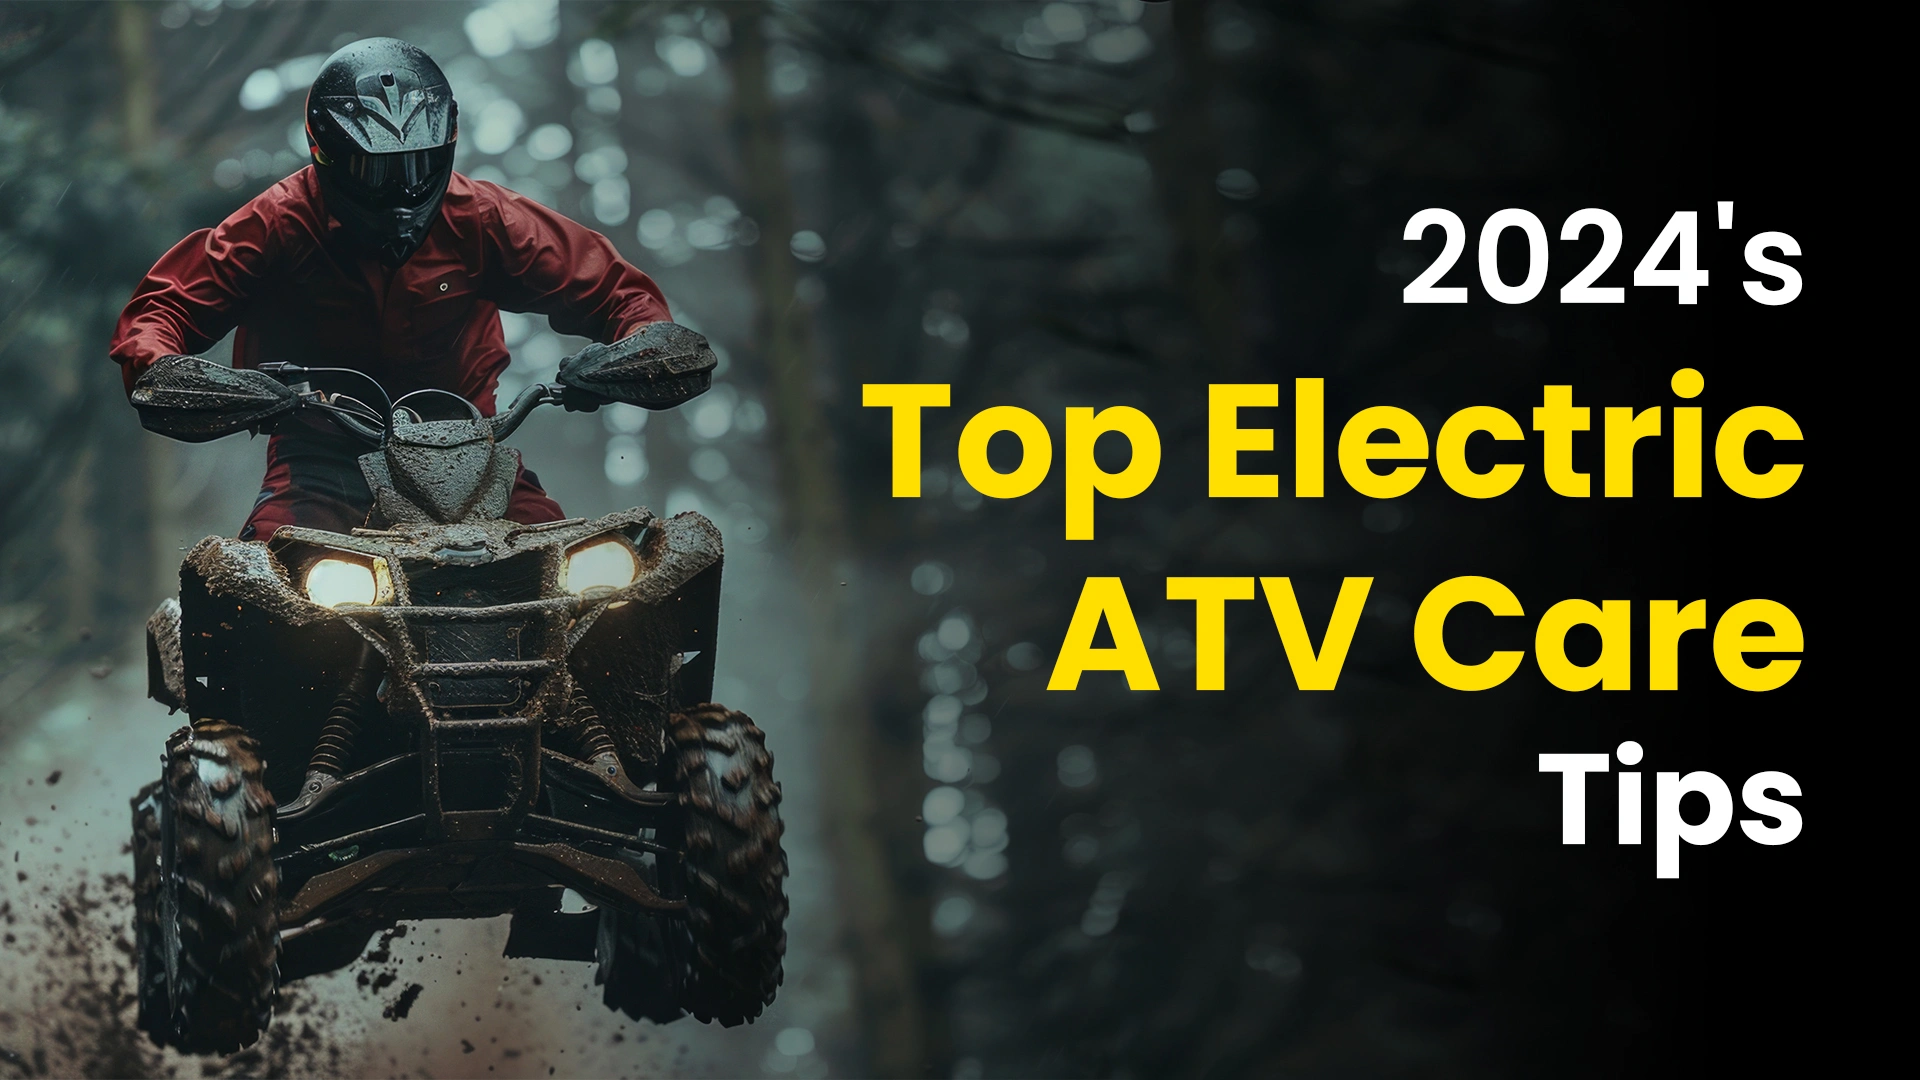 2024’s Top Electric ATV Care Tips